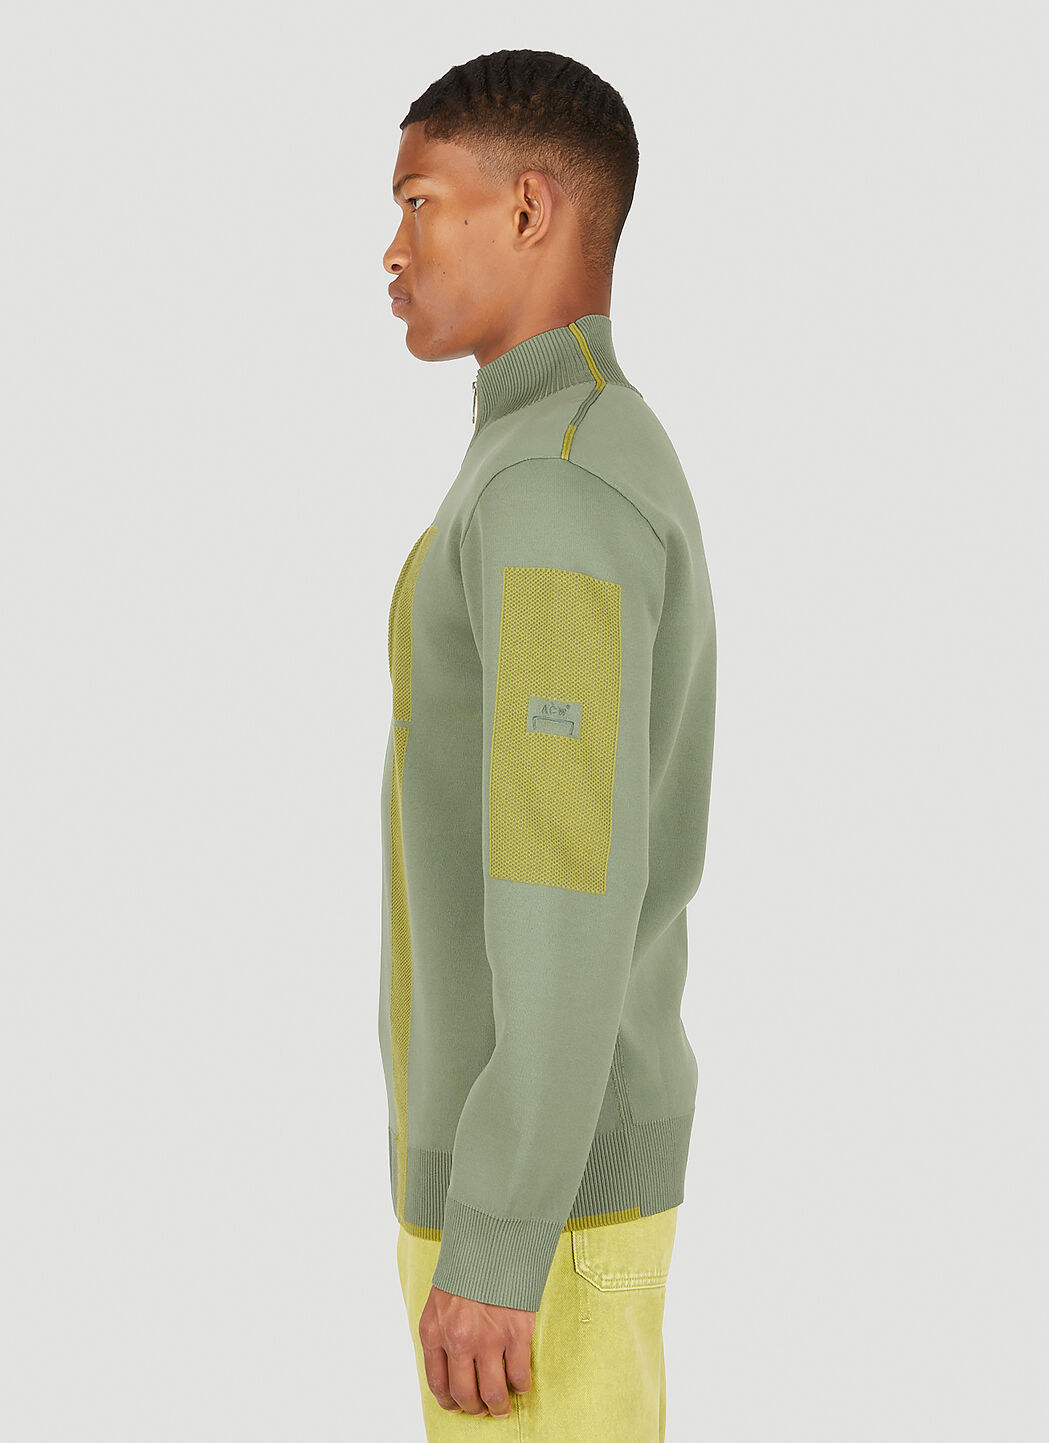 A-COLD-WALL* Stria Zip Front Knit Sweatshirt in Green | LN-CC®